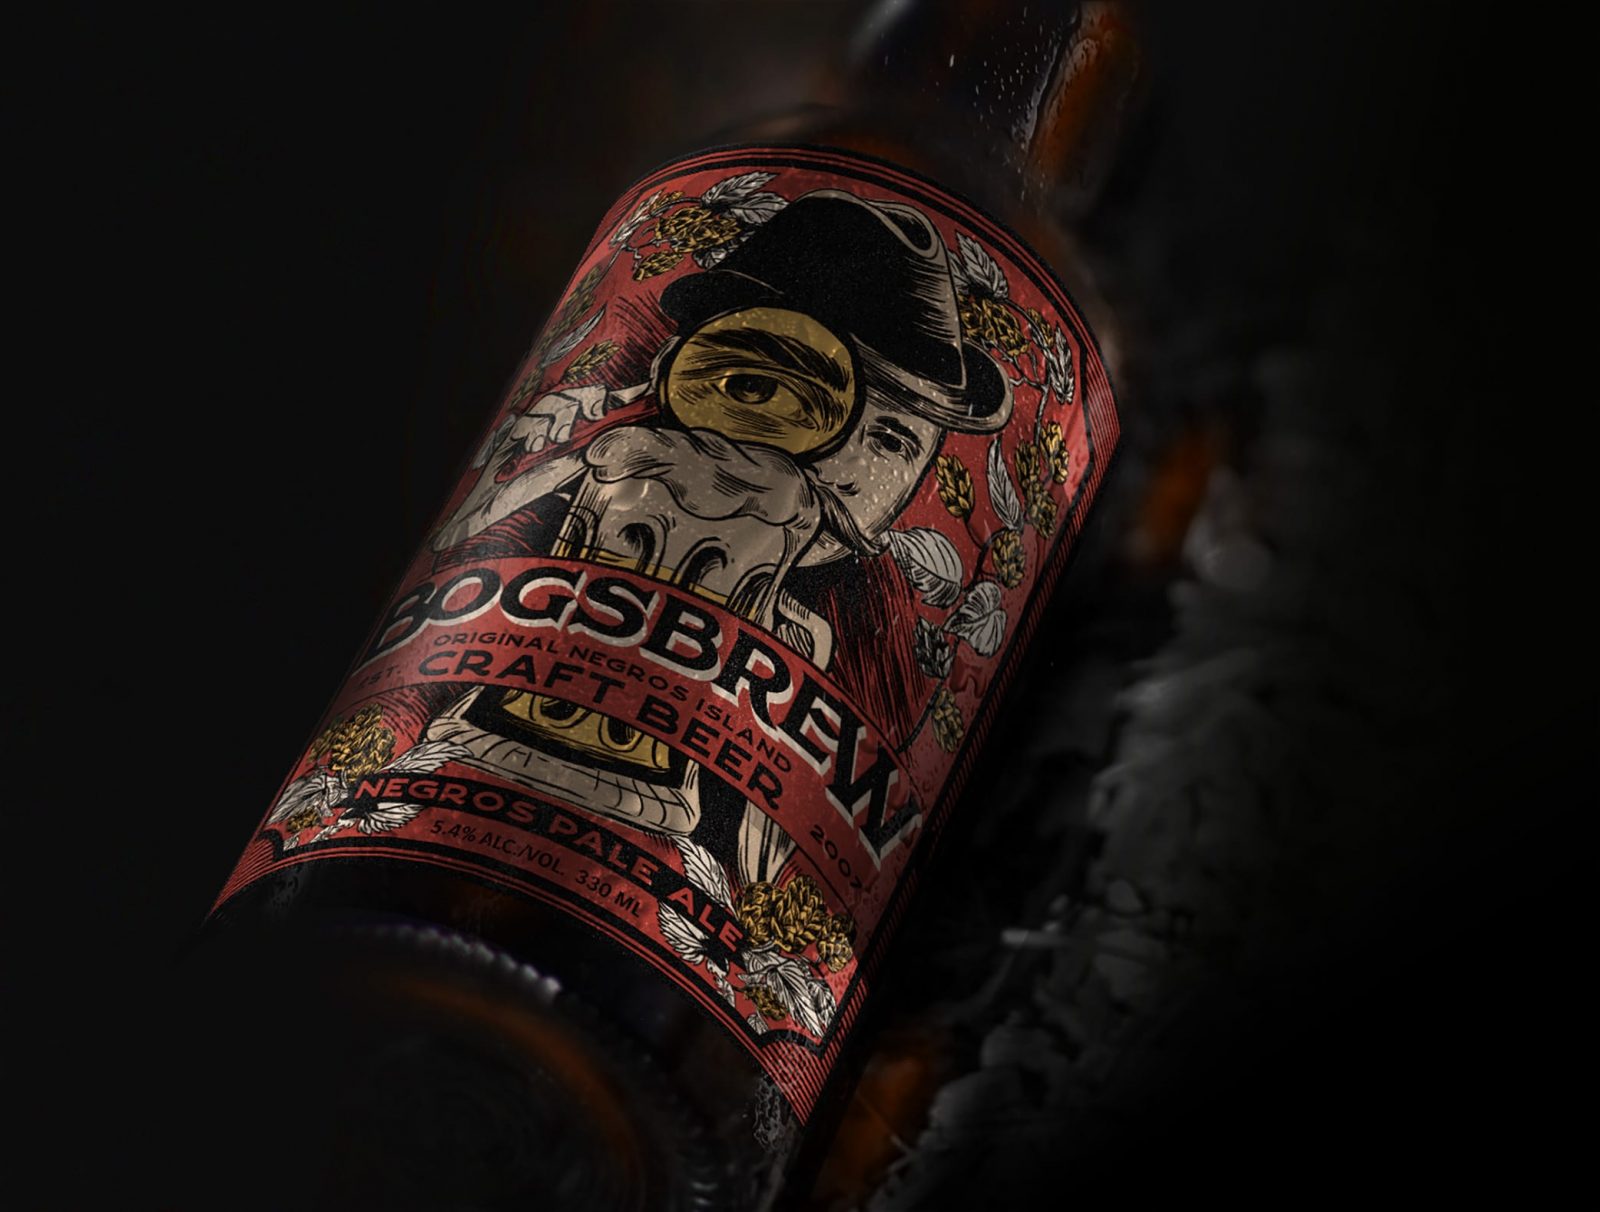 Package Illustration for Bogsbrew Craft Beer from the Philippines